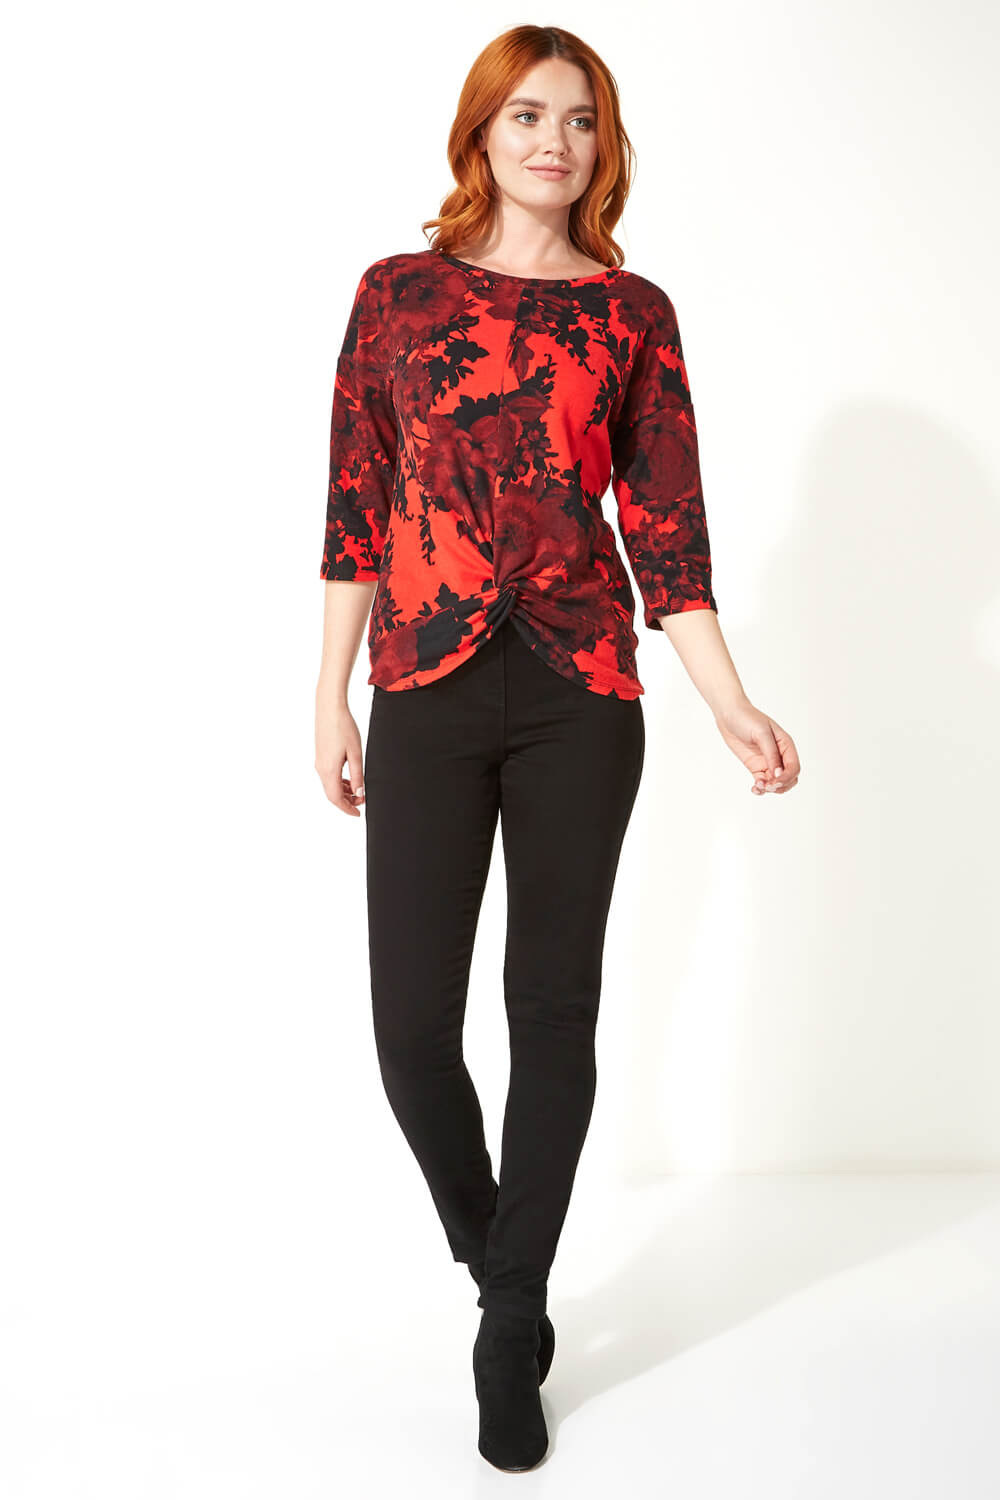 Red Floral Print 3/4 Sleeve Top, Image 2 of 5